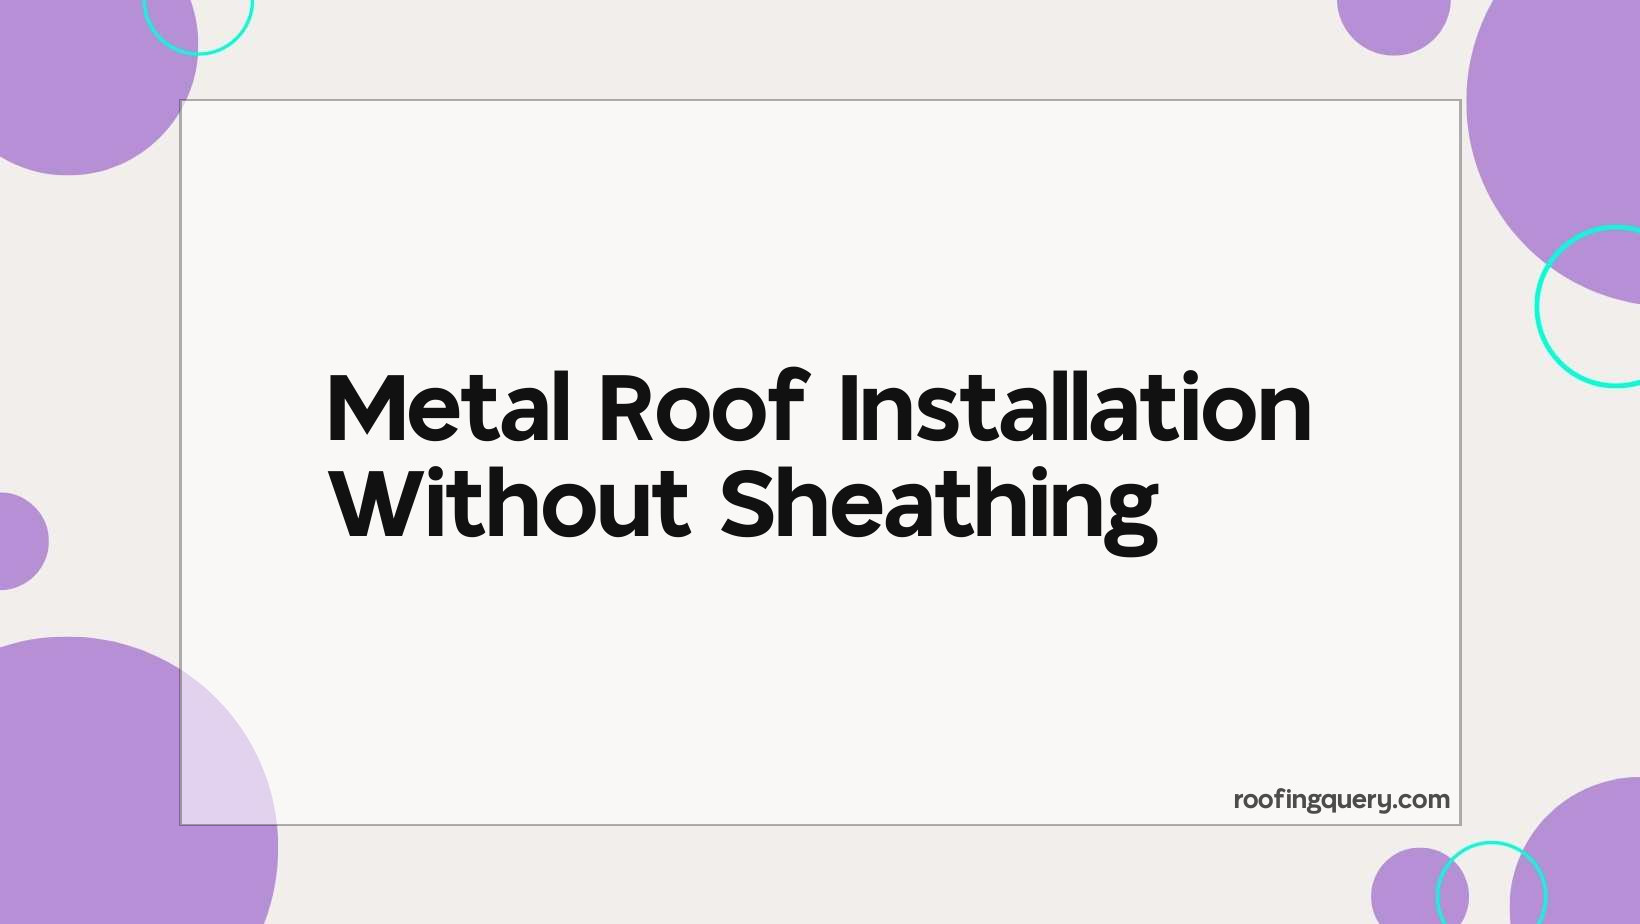 Metal Roof Installation Without Sheathing